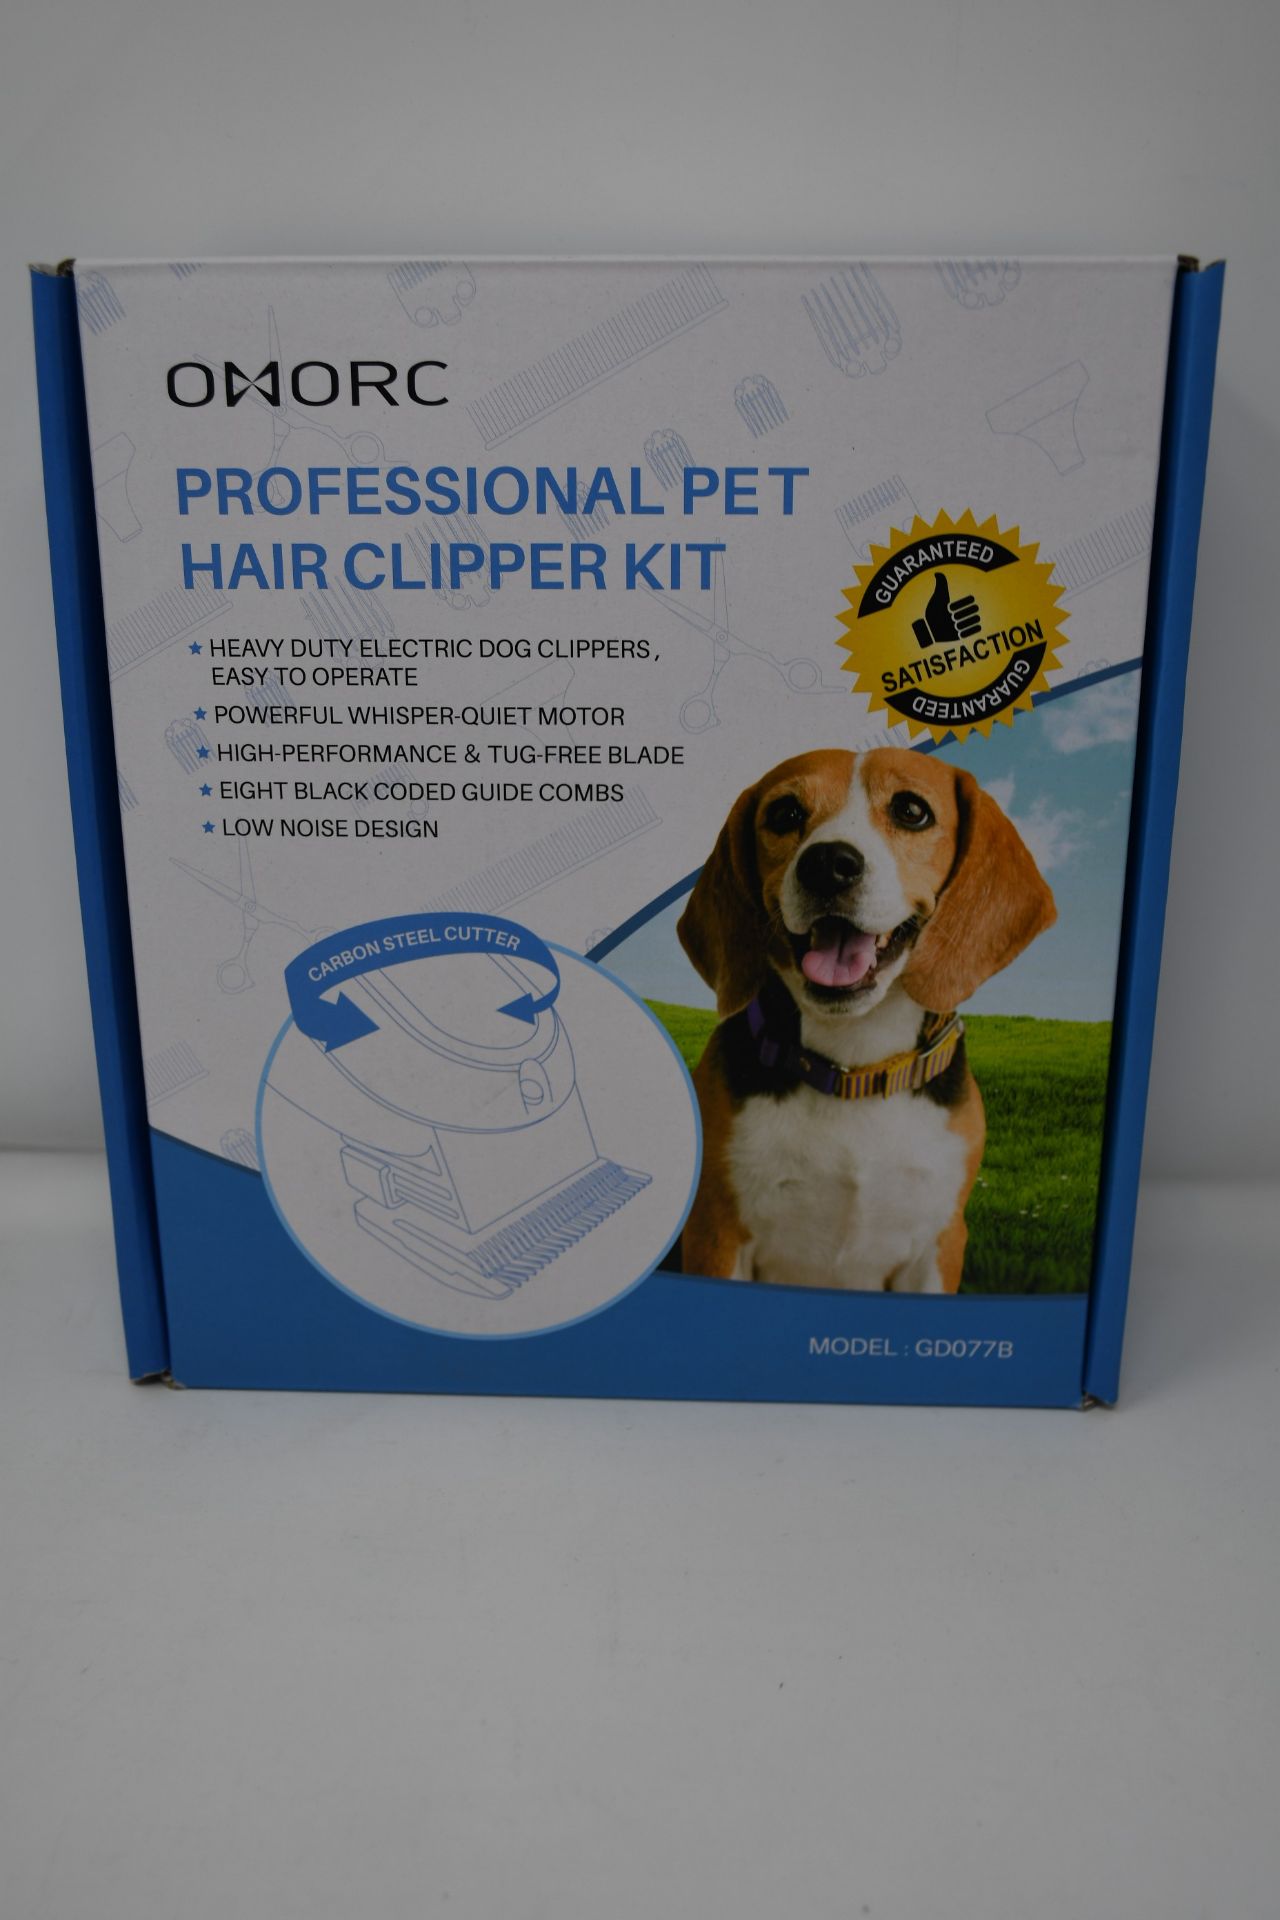 Five boxed as new Omorc Professional Pet Hair Clipper Kits (GD077B).